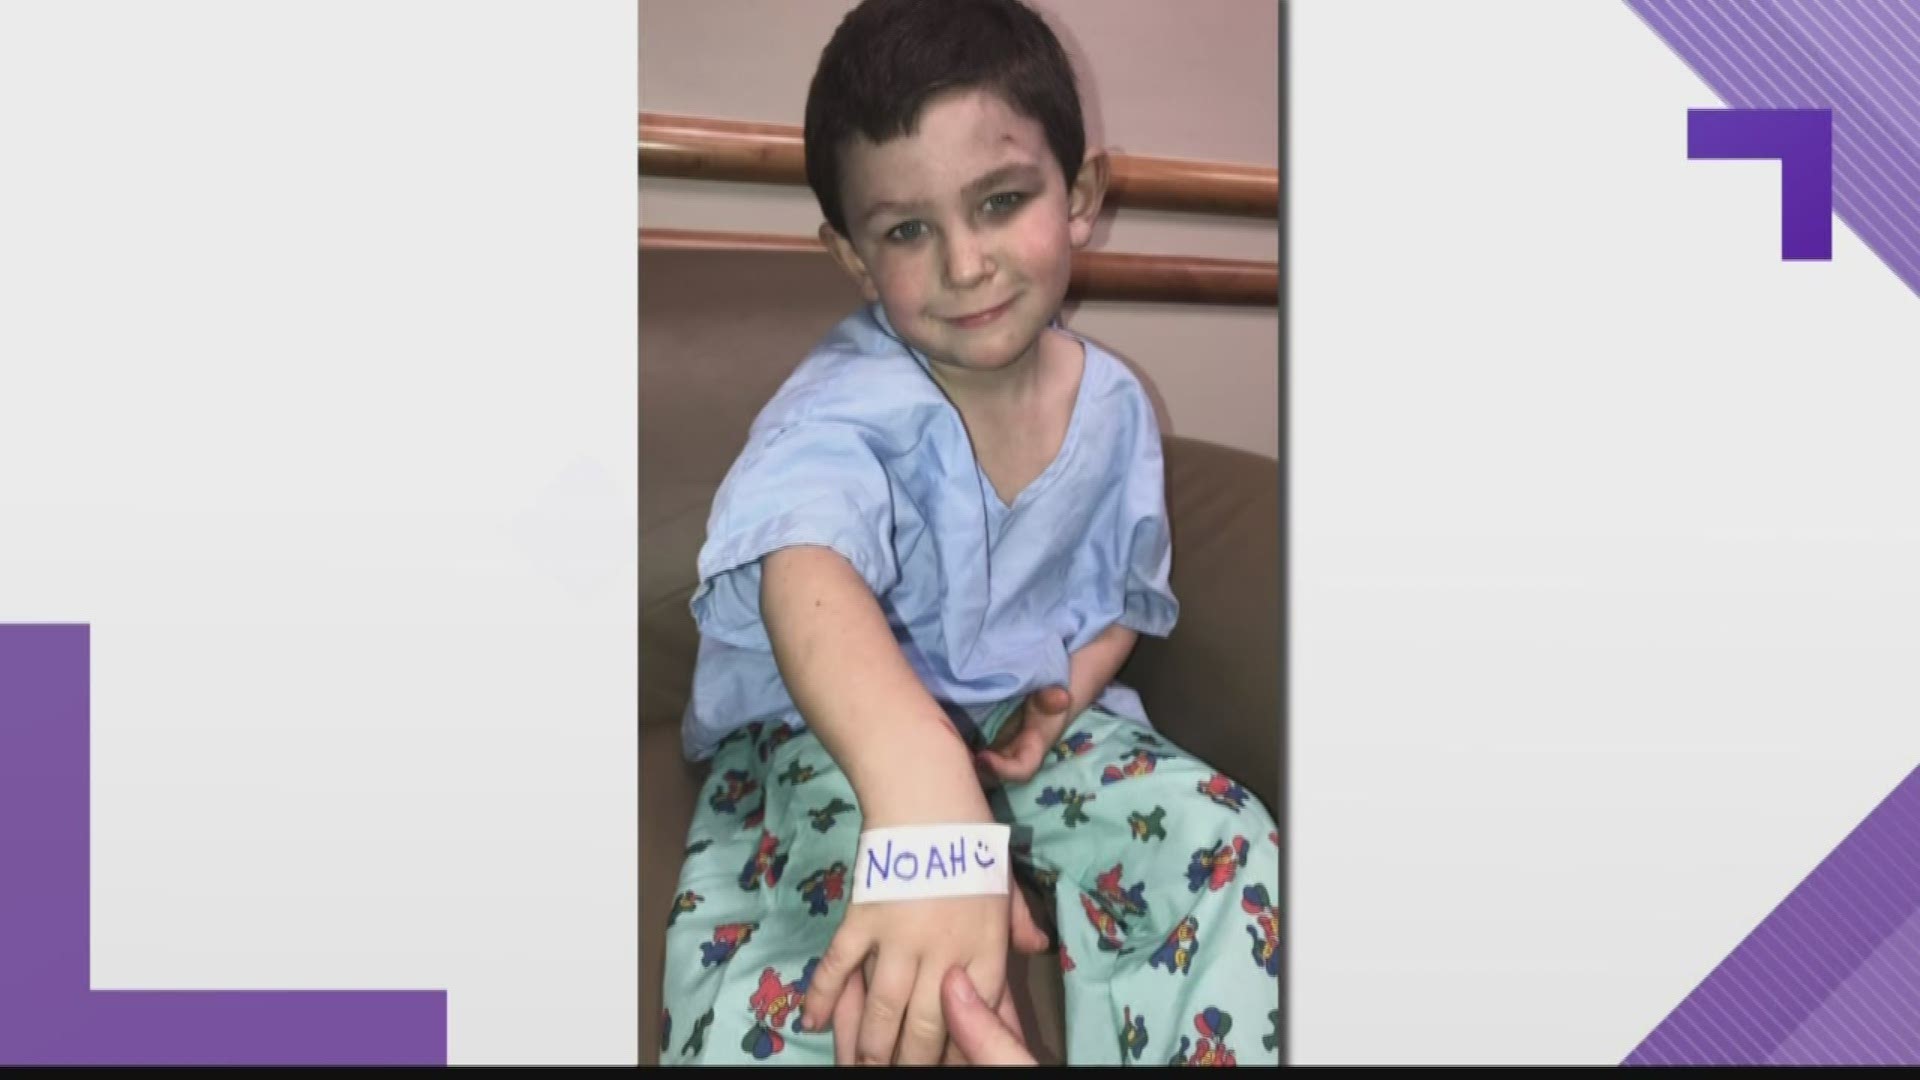 When 5-year-old Noah woke up, he saw that the room his sister and he slept in was on fire. His quick actions helped save his family's lives.